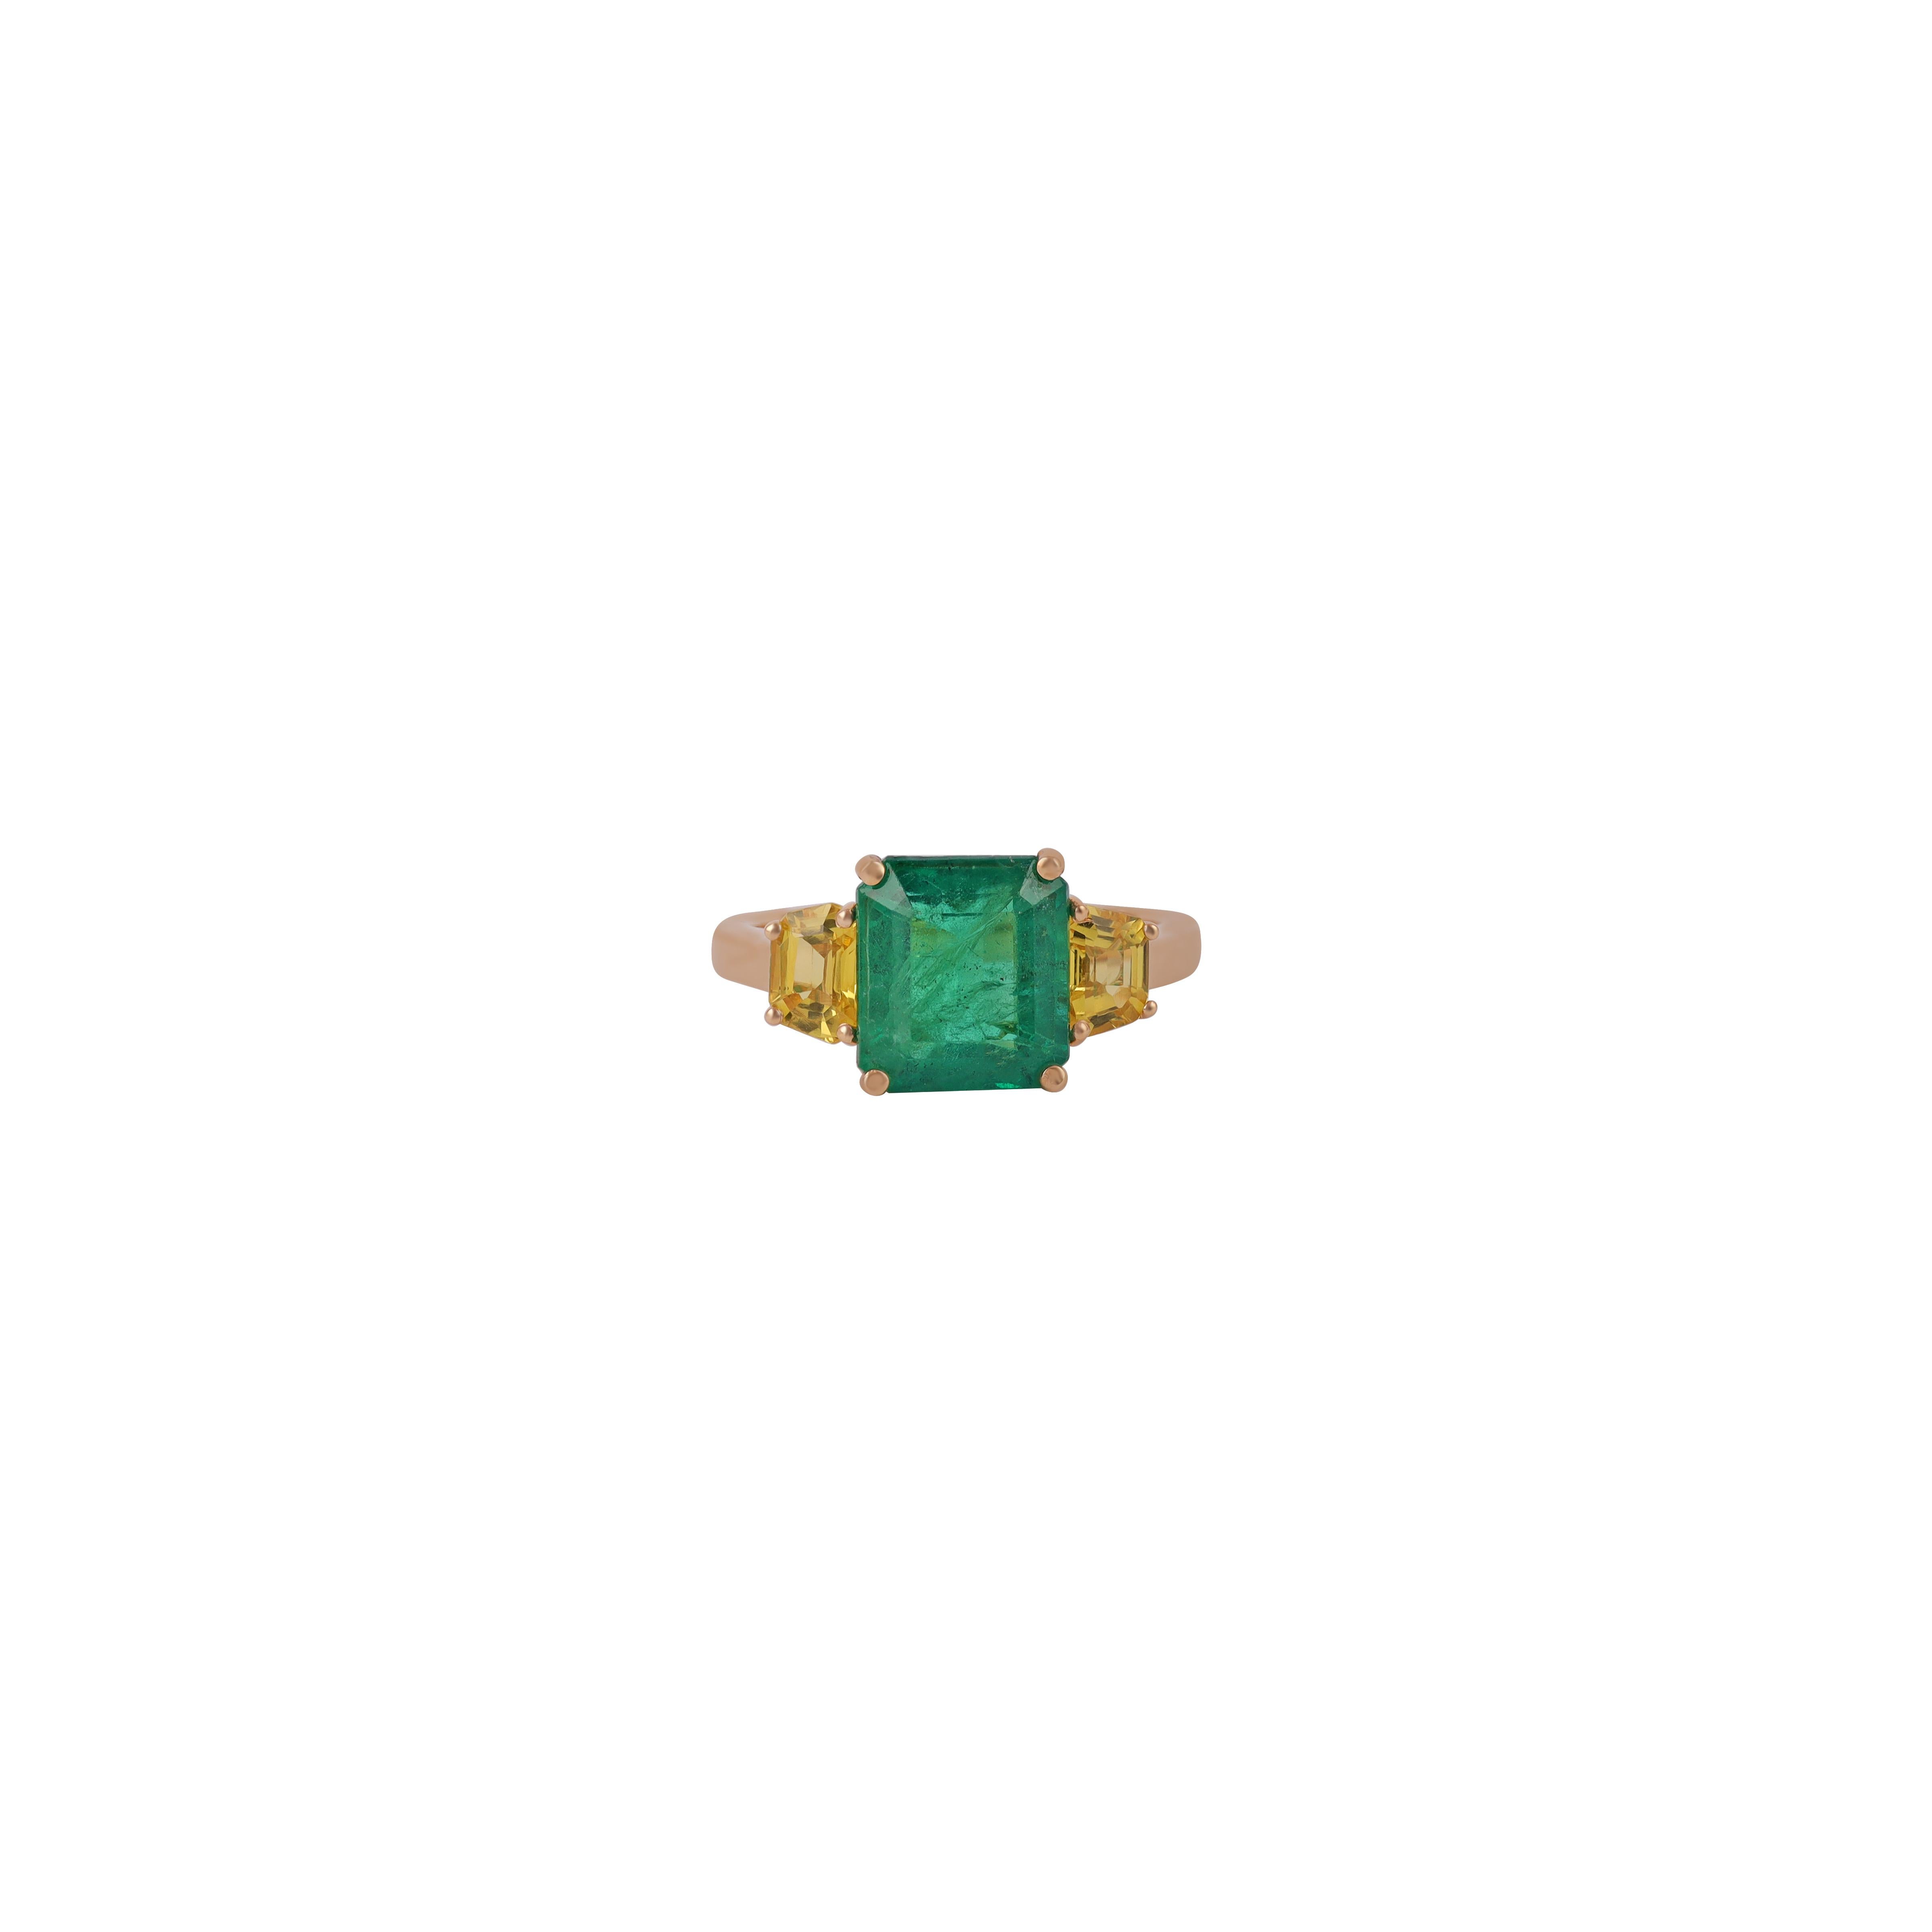 Product Details

→™ Jewelry Type - Rings
→™ Jewelry Main Material - 18K Gold, 18K Gold

Stone Details
→™ Primary Stone Type: Emerald  
→™ Primary Stone Details: Oiled
→™ Primary Stone Count: 1
→™ Total Primary Stone Carat Weight: 3.4 CT



Secondary